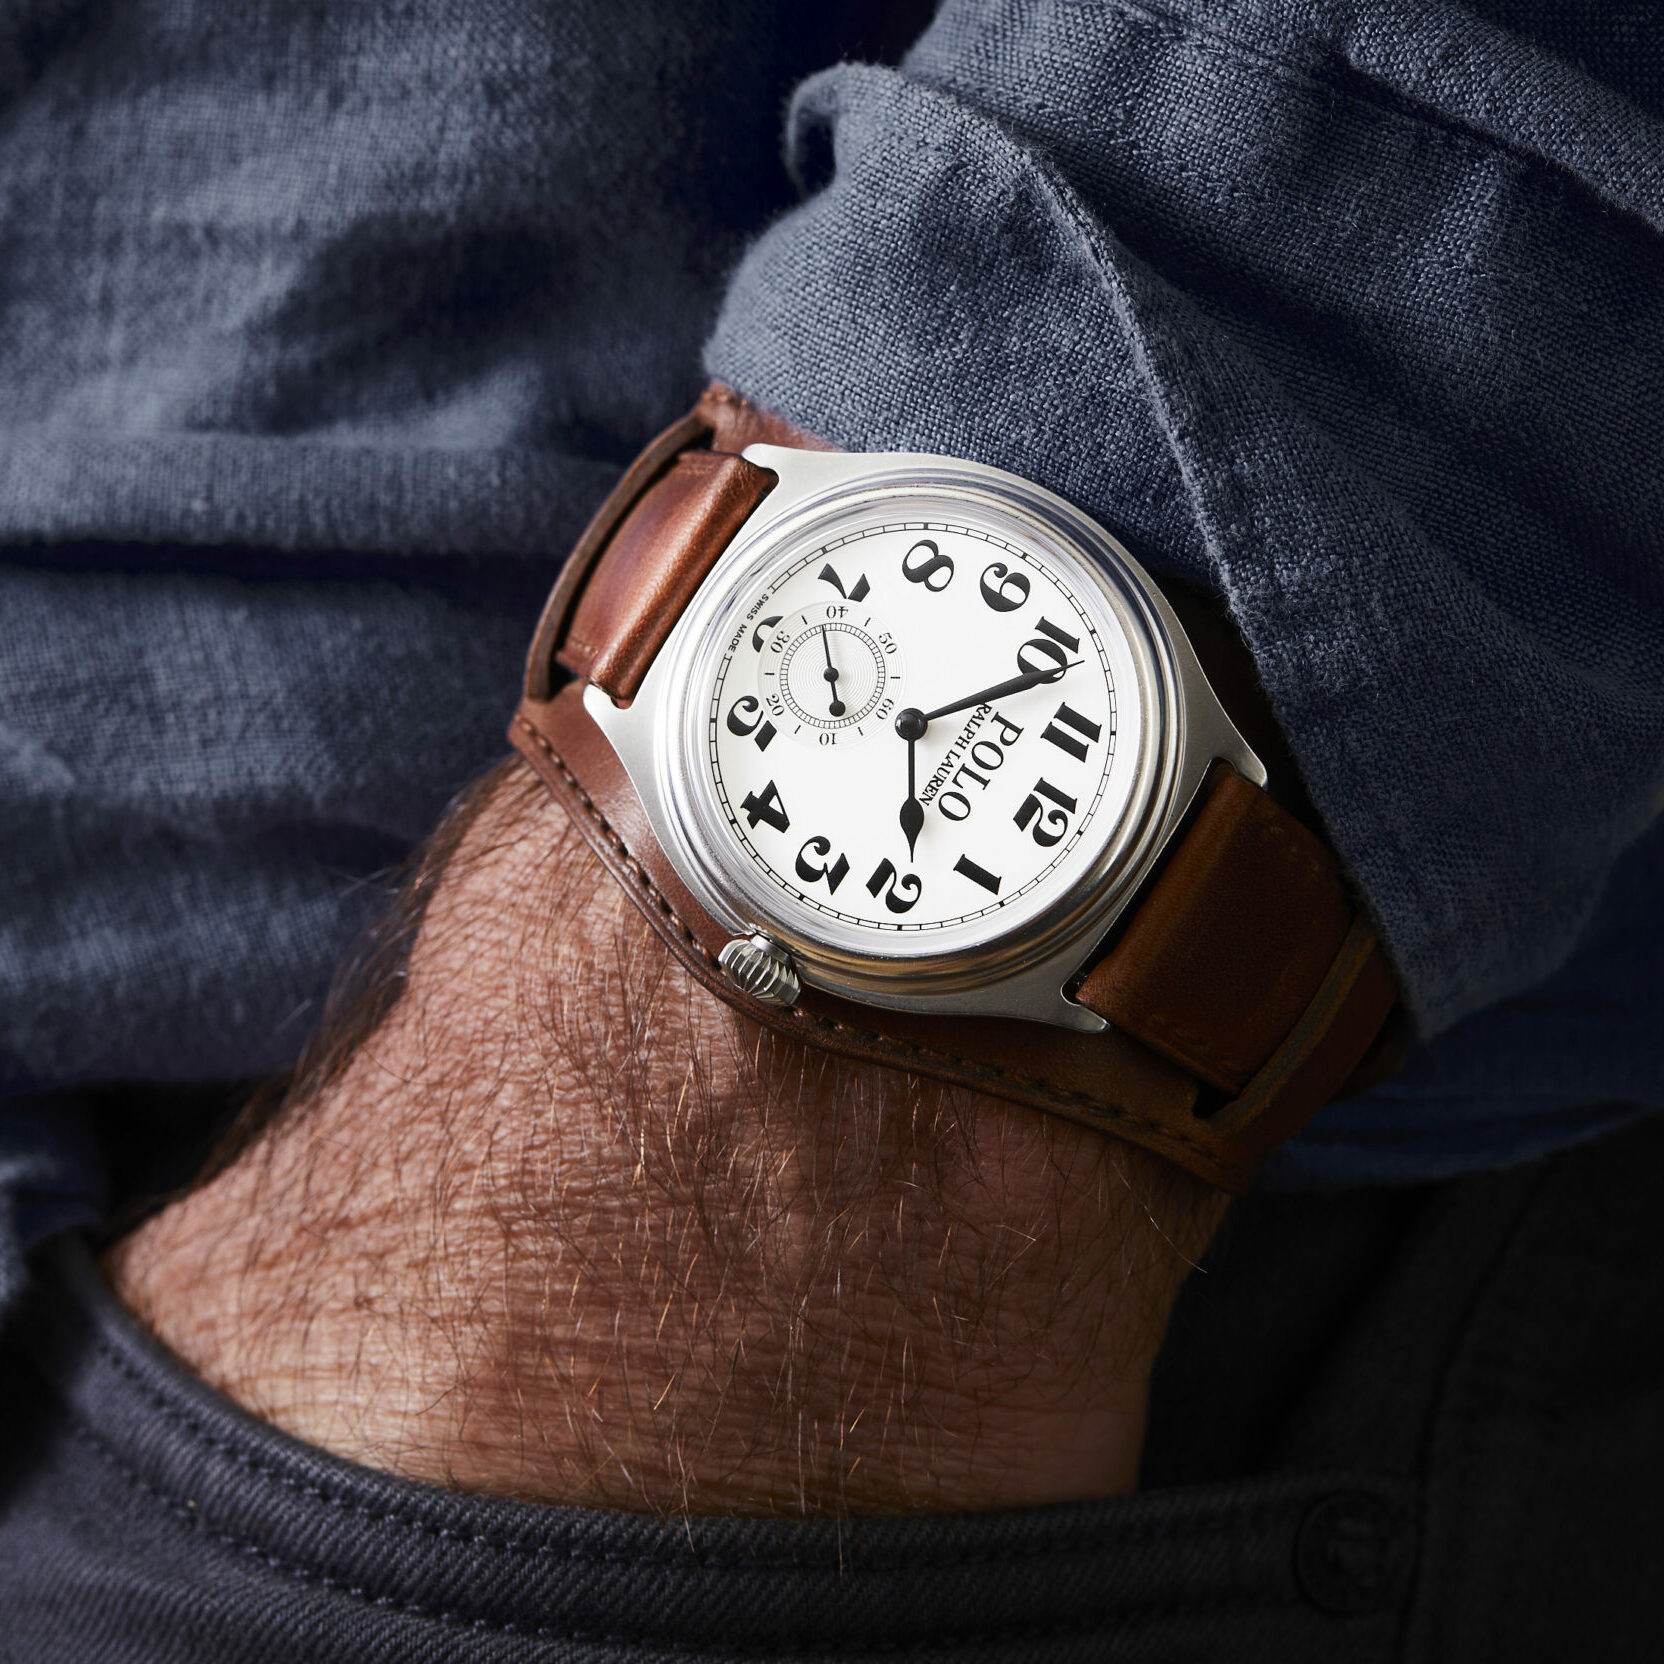 The new Polo Vintage 67 offers a timeless aesthetic and 90 hours of power reserve for under $3K (Live Pics)